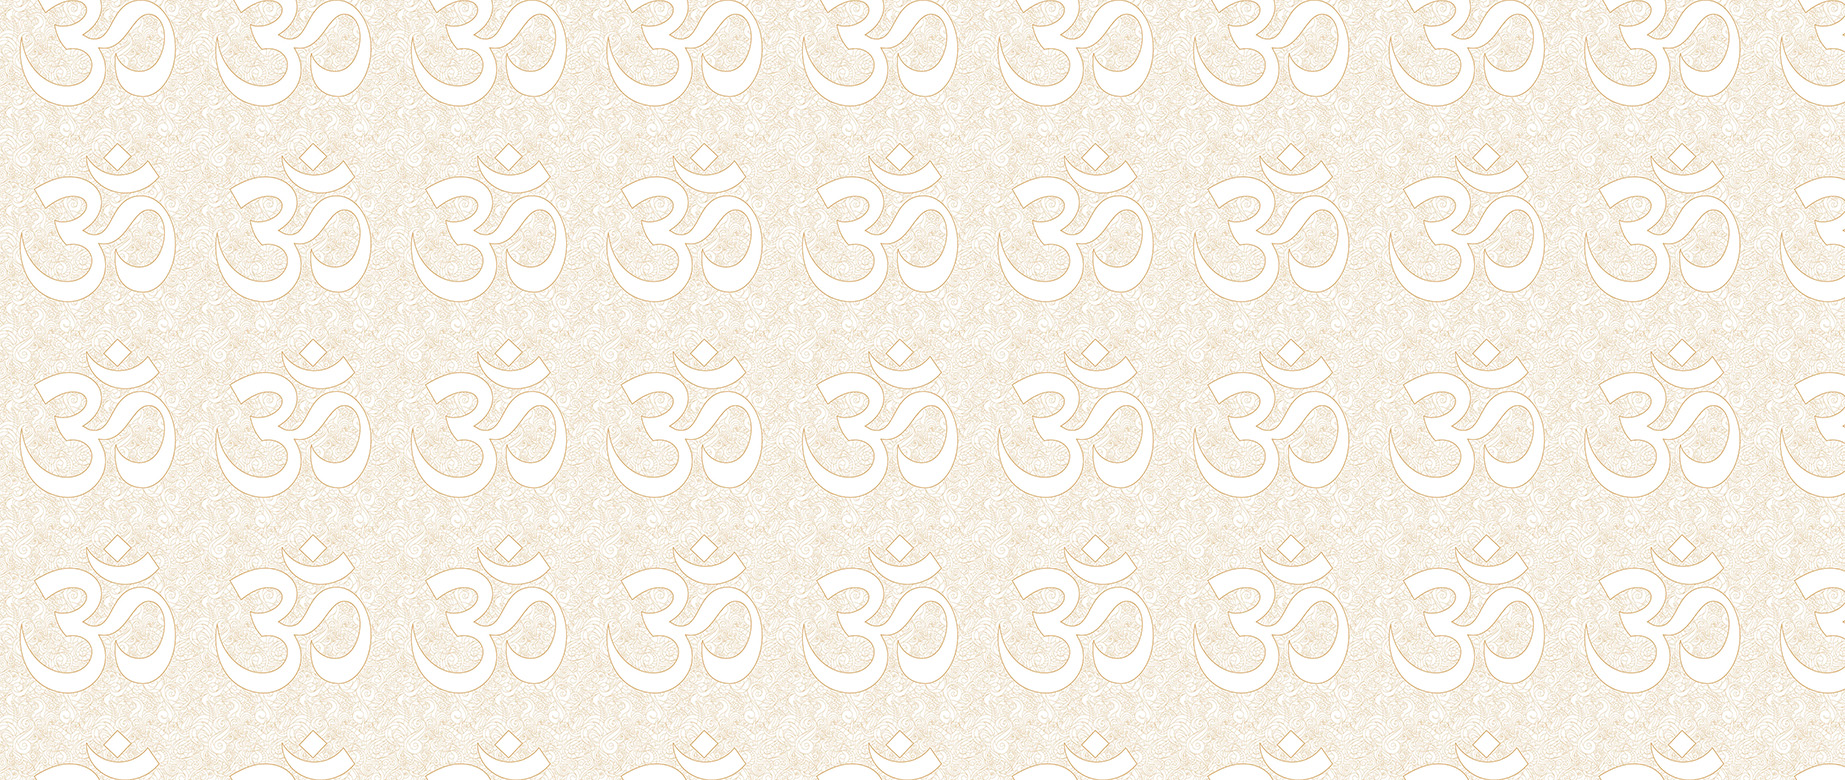 golden-om-on-paisley-design-wallpapers-full-wide-view